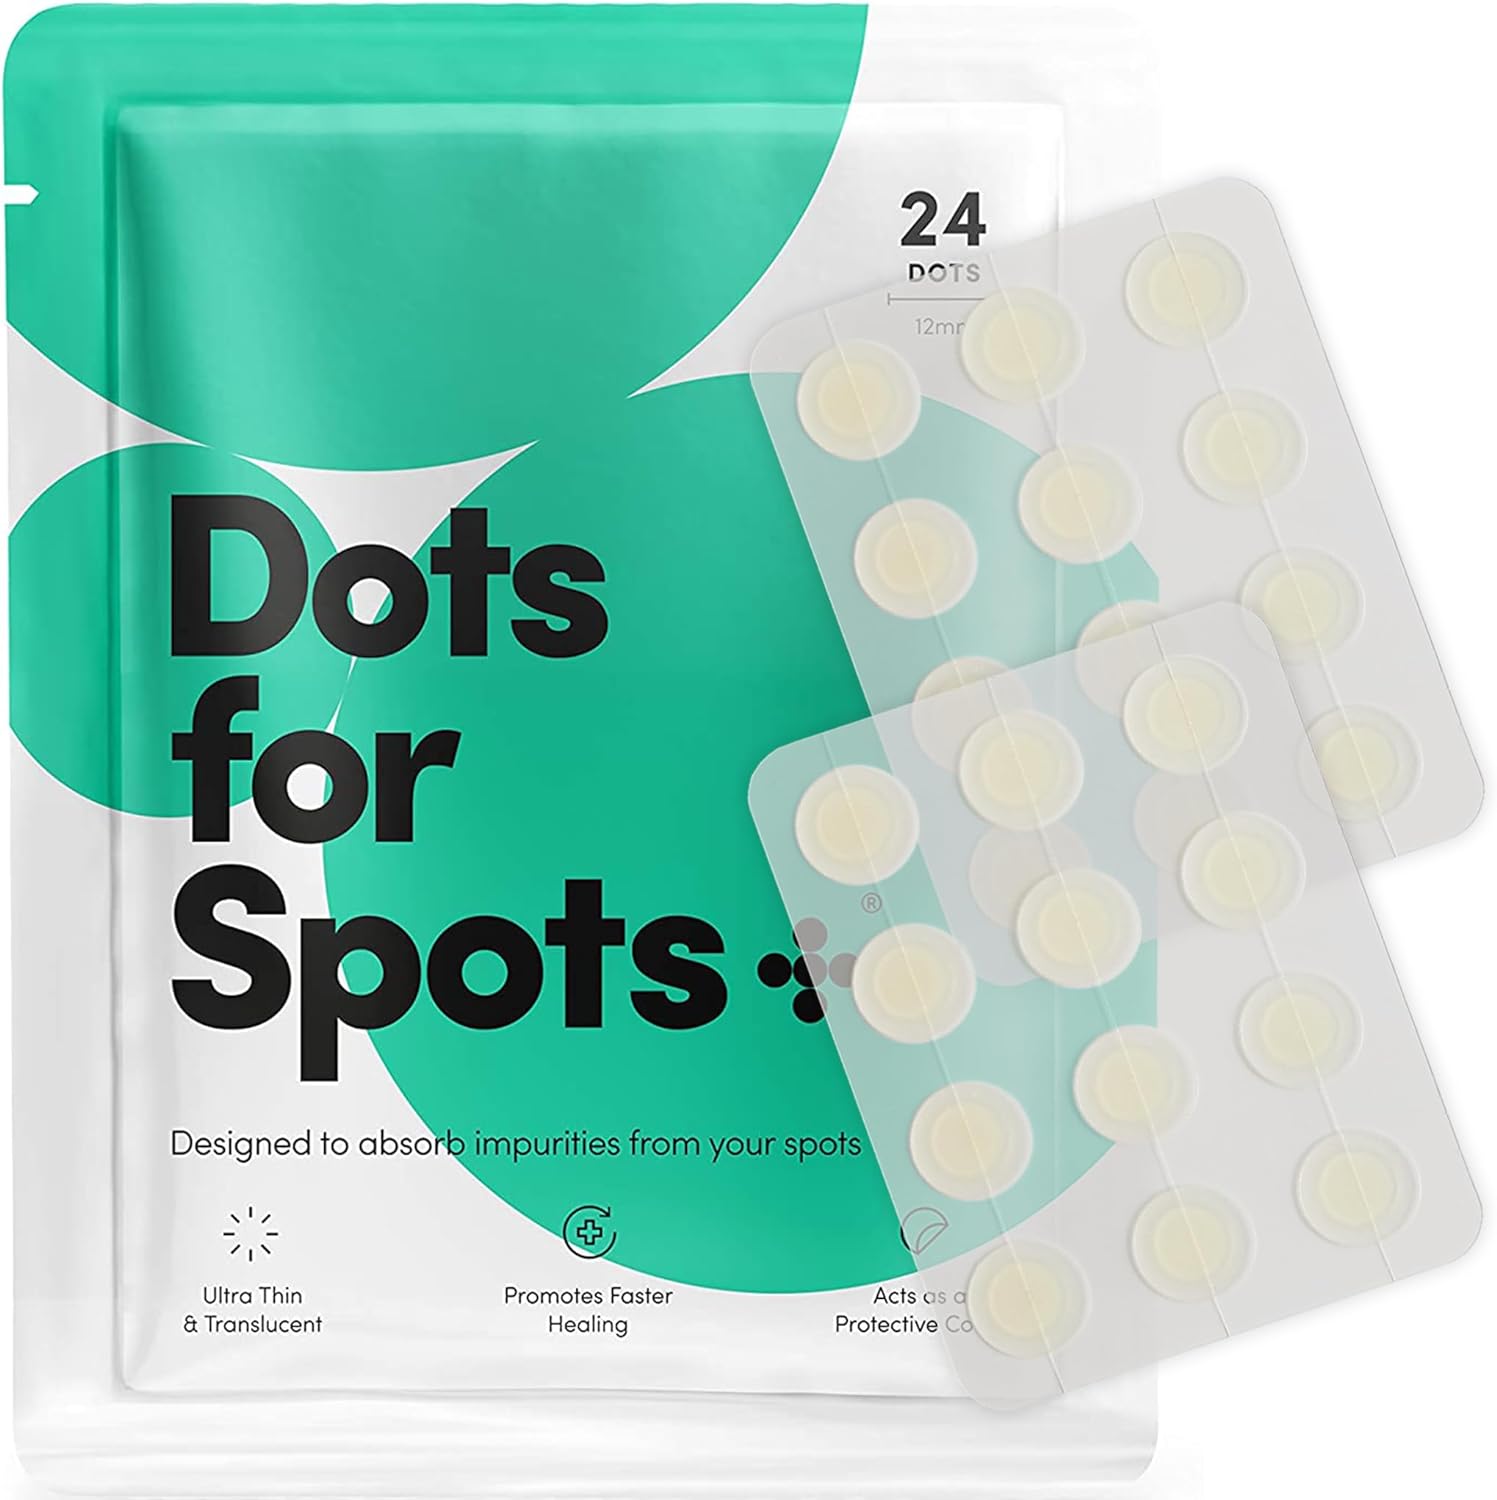 Dots for Spots Acne Patches - Pack of 24 Translucent Hydrocolloid Pimple Patch Spot Treatment Stickers for Face and Body - Fast-Acting, Vegan  Cruelty Free Skin Care